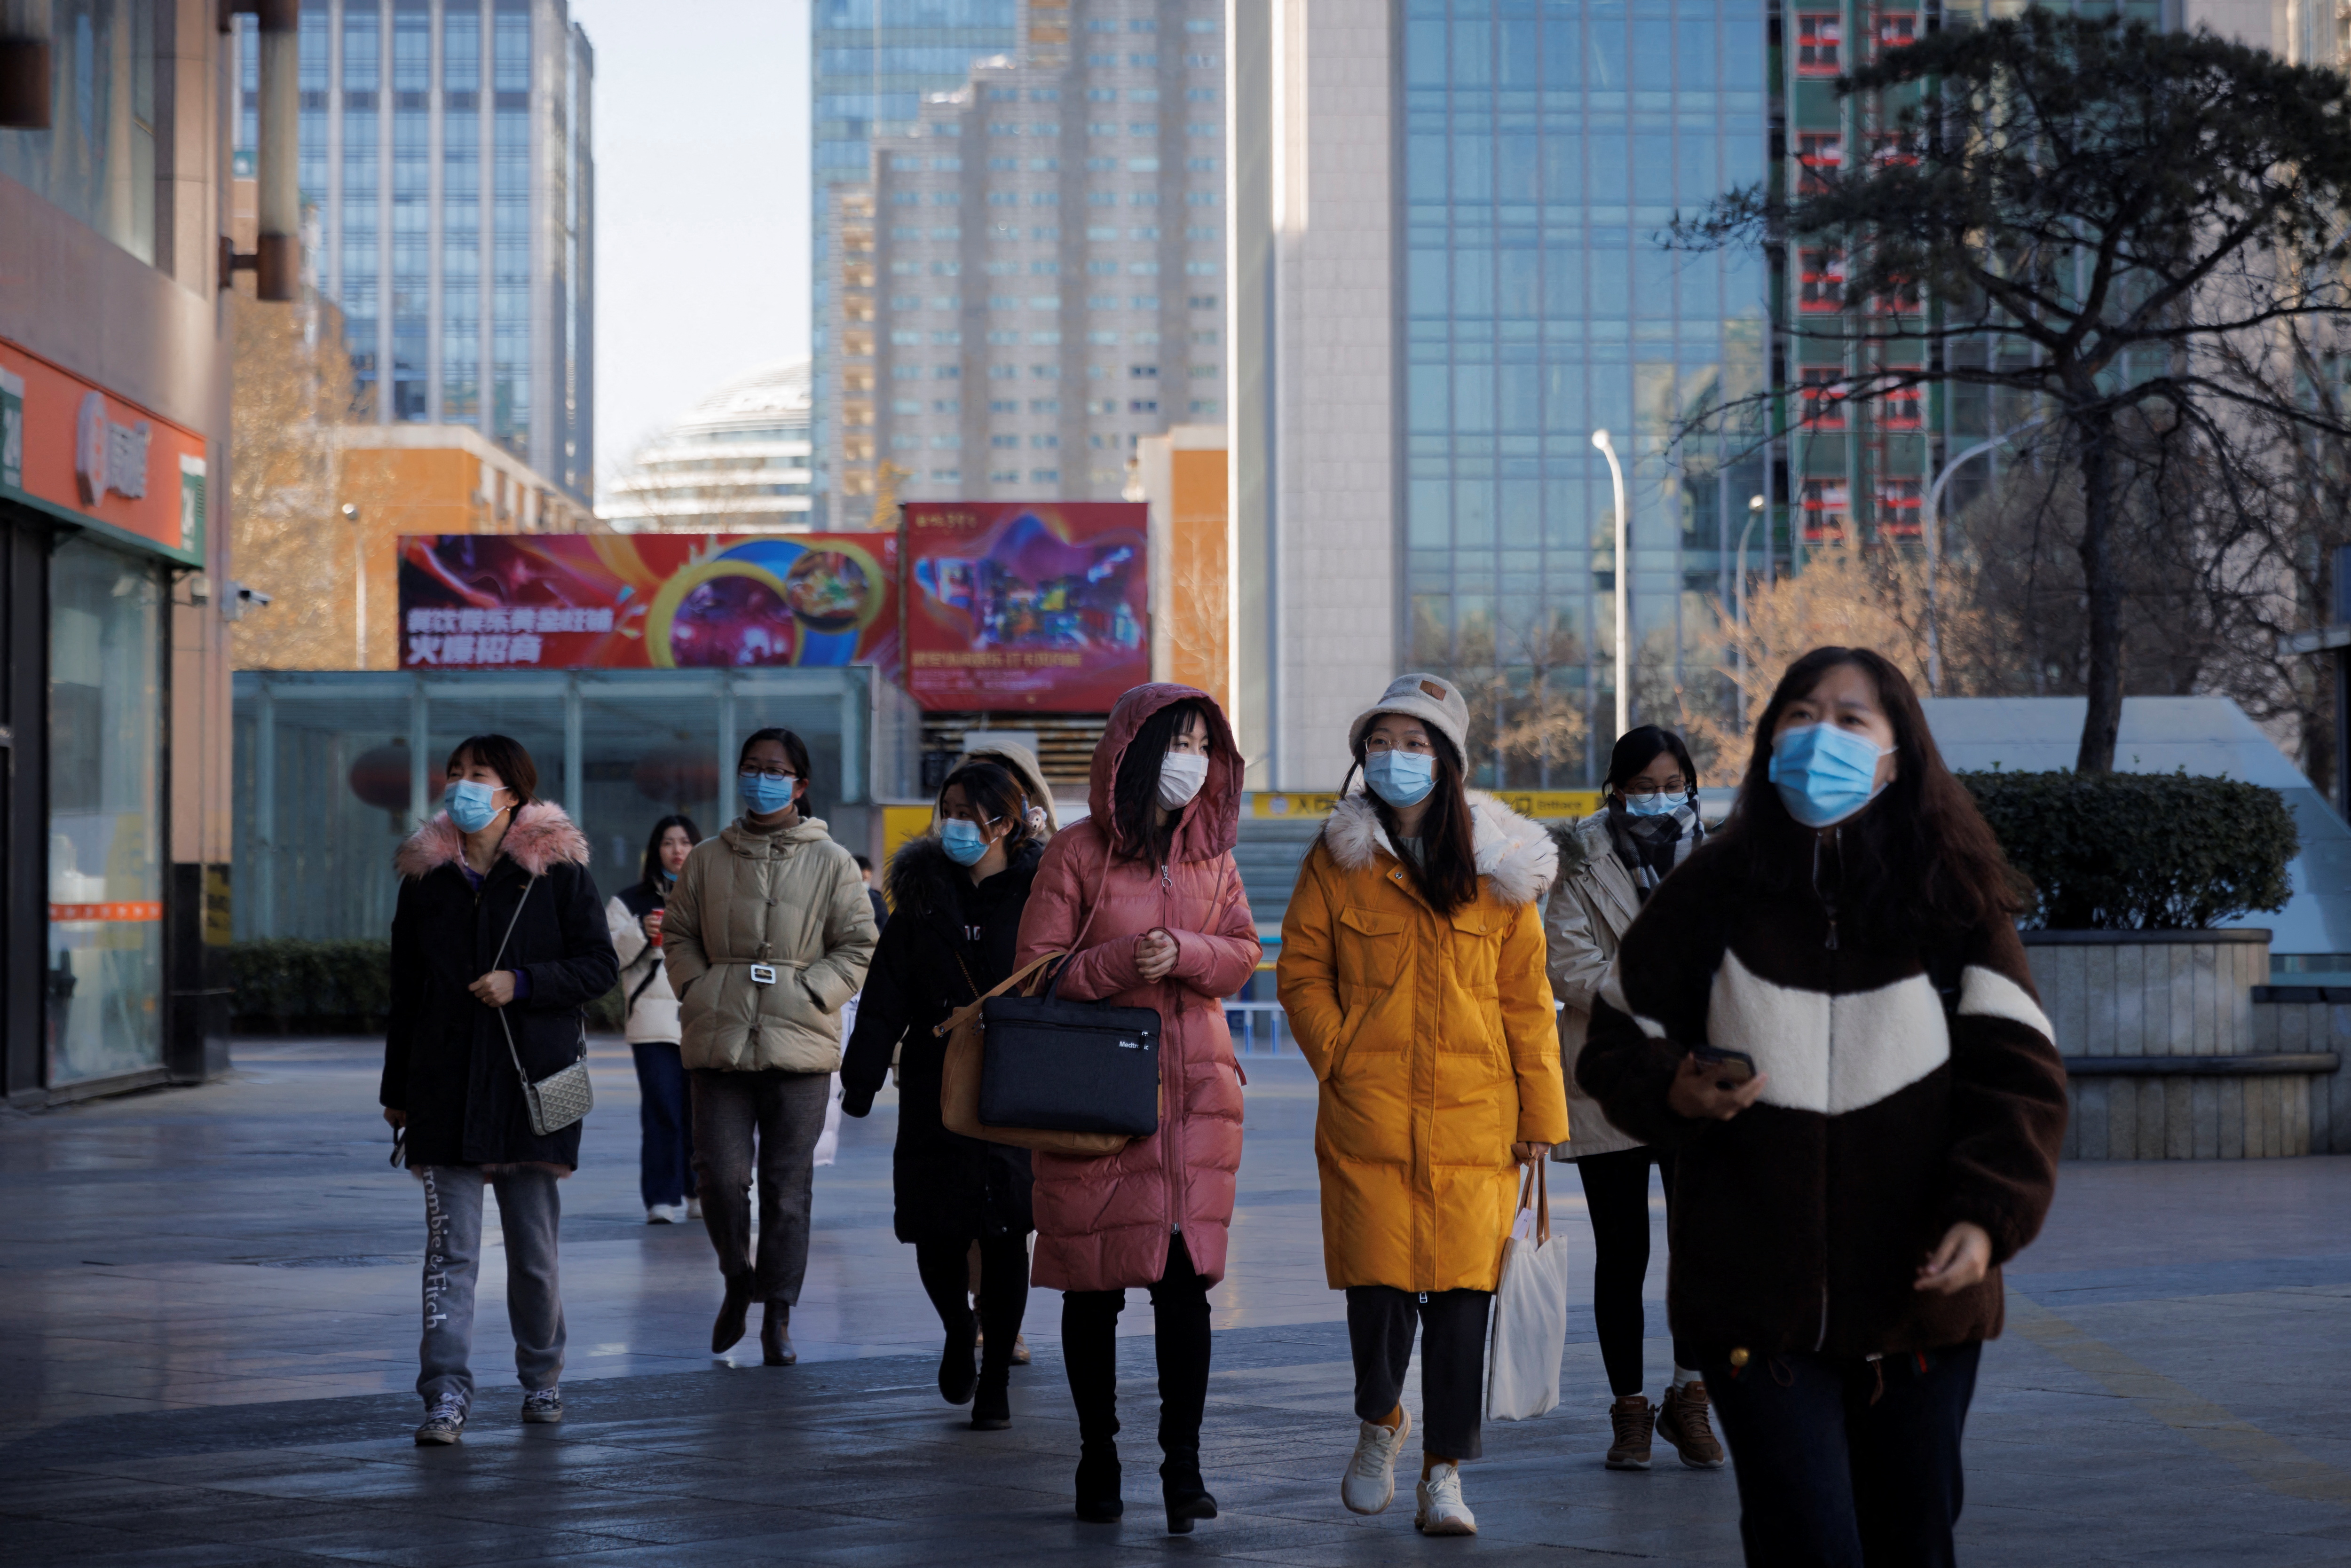 People walk on a street as the coronavirus disease (COVID-19) outbreak continues in Beijing, China, January 13, 2022. REUTERS/Thomas Peter